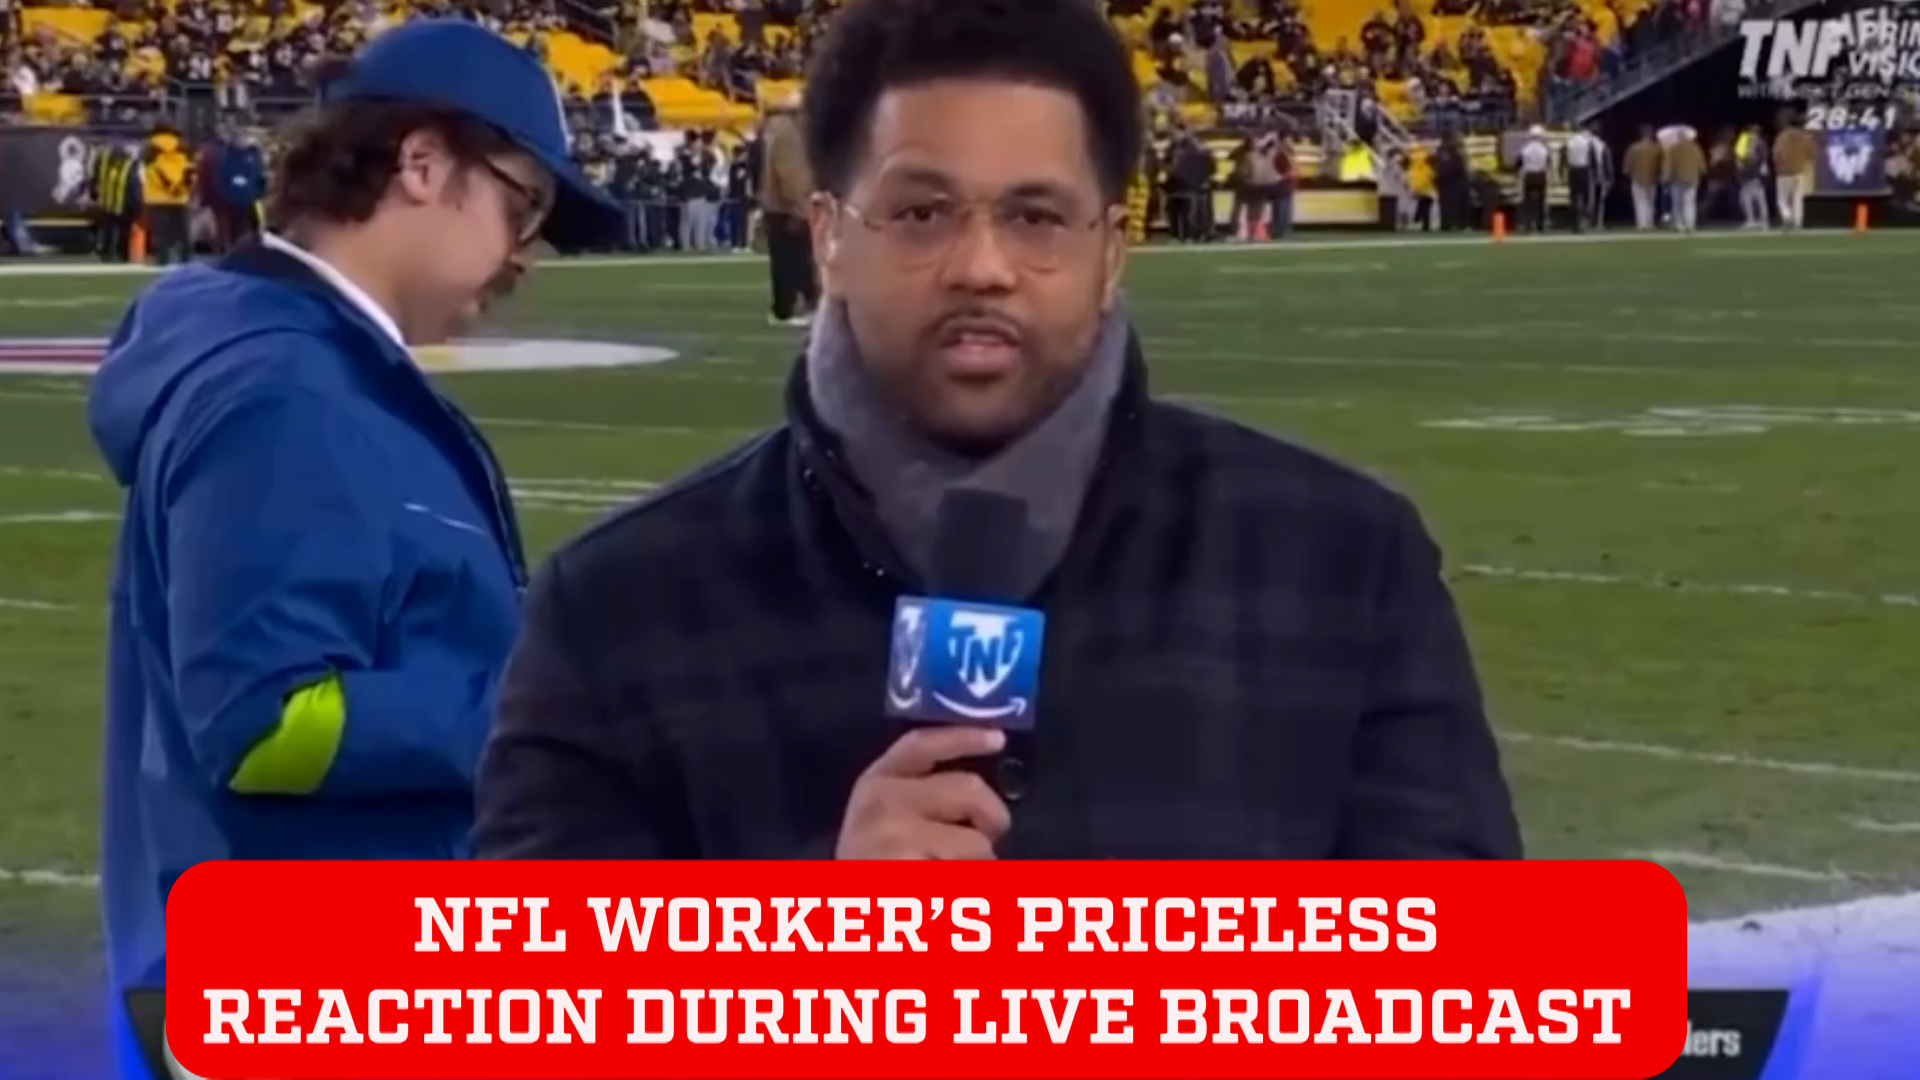 NFL employee's hilarious viral reaction as he unwittingly photobombs live TV broadcast